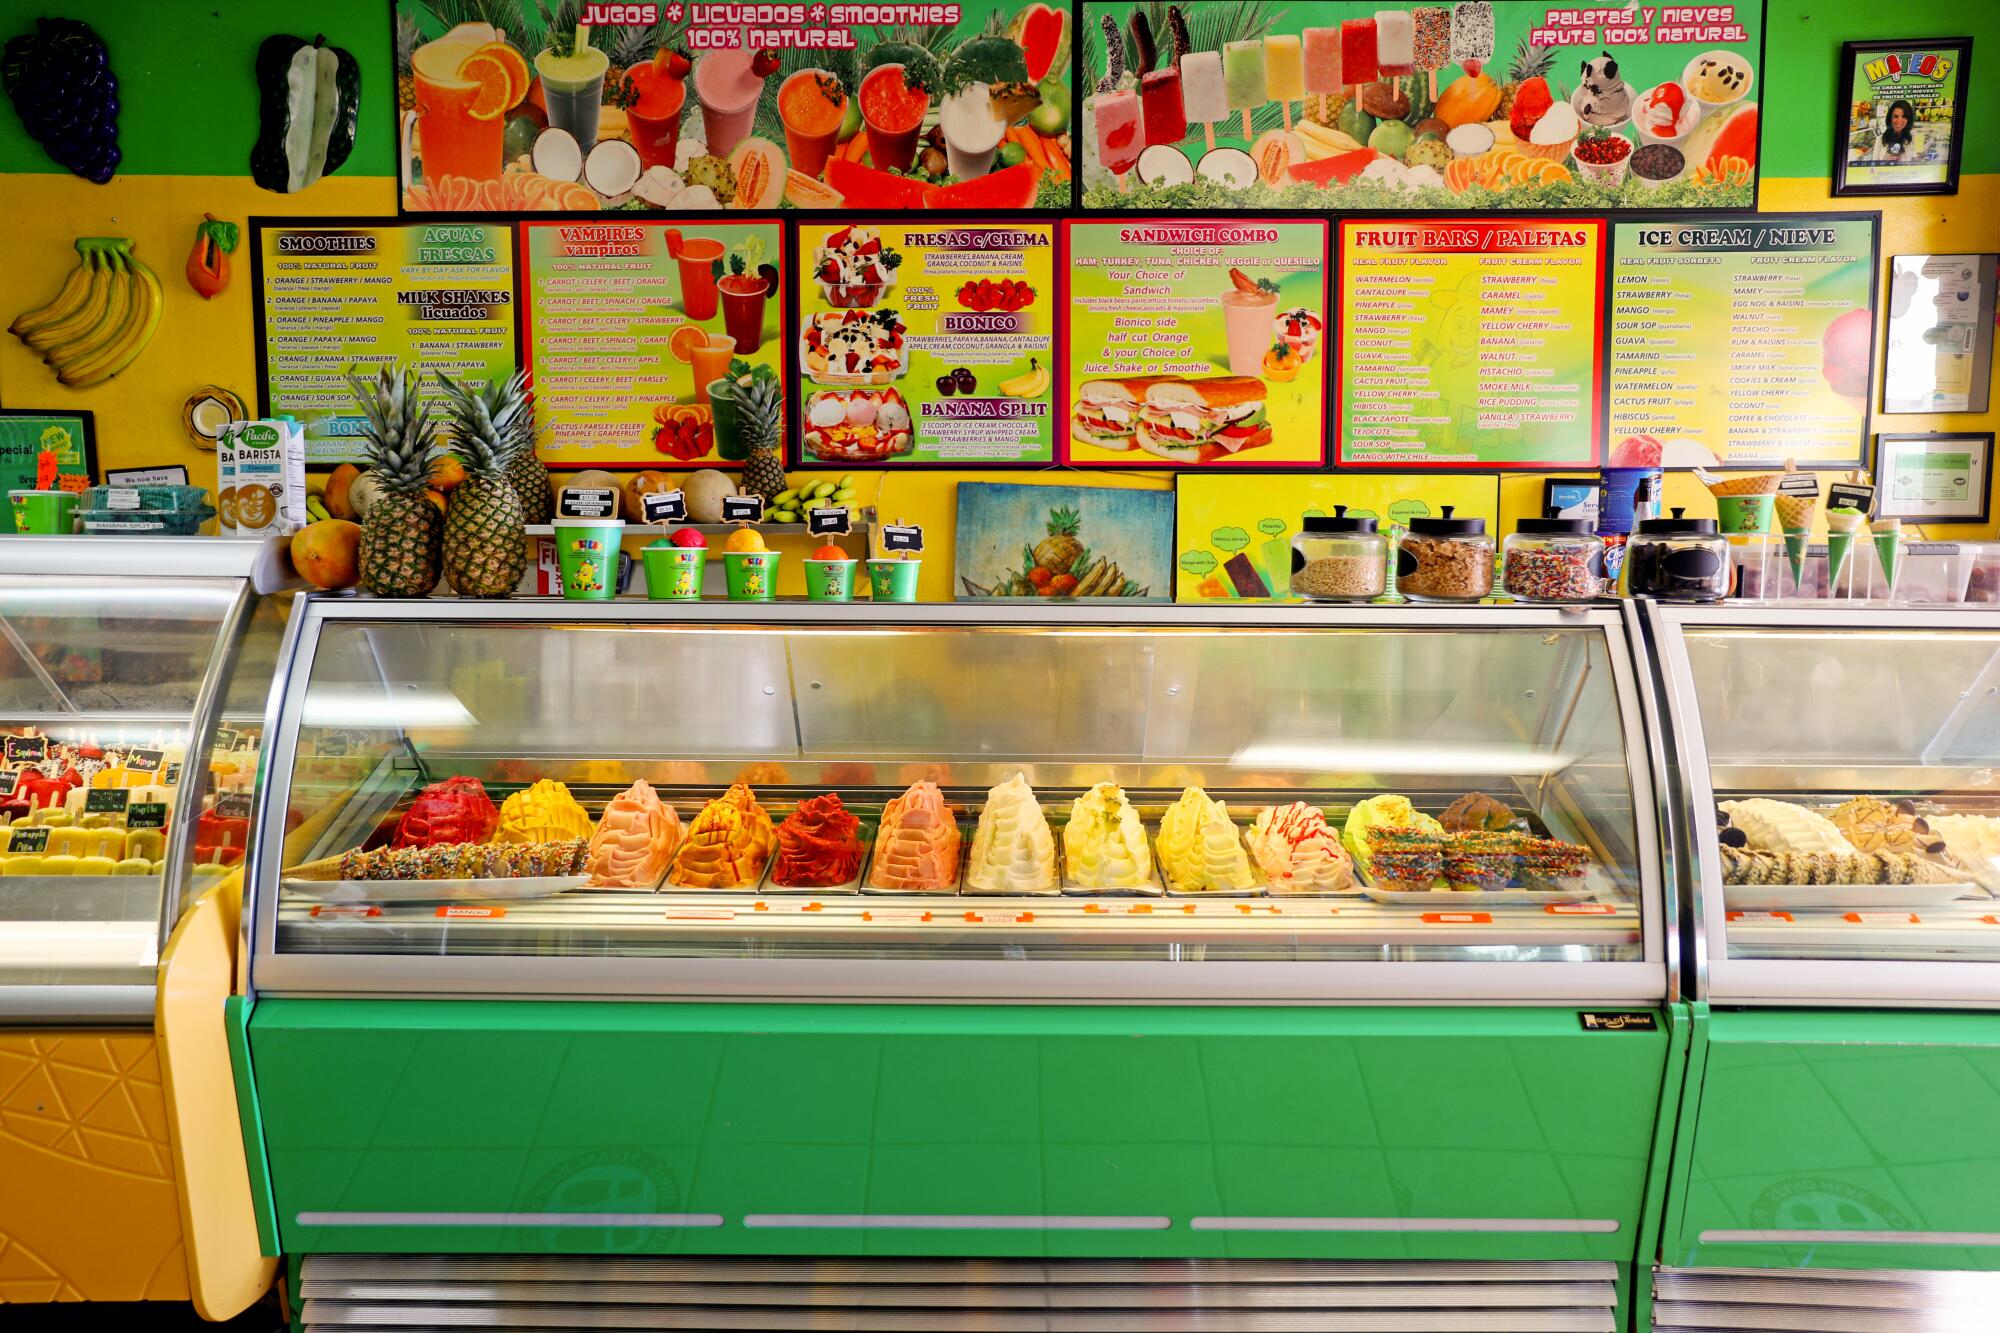 The front counter of a paleta shop.